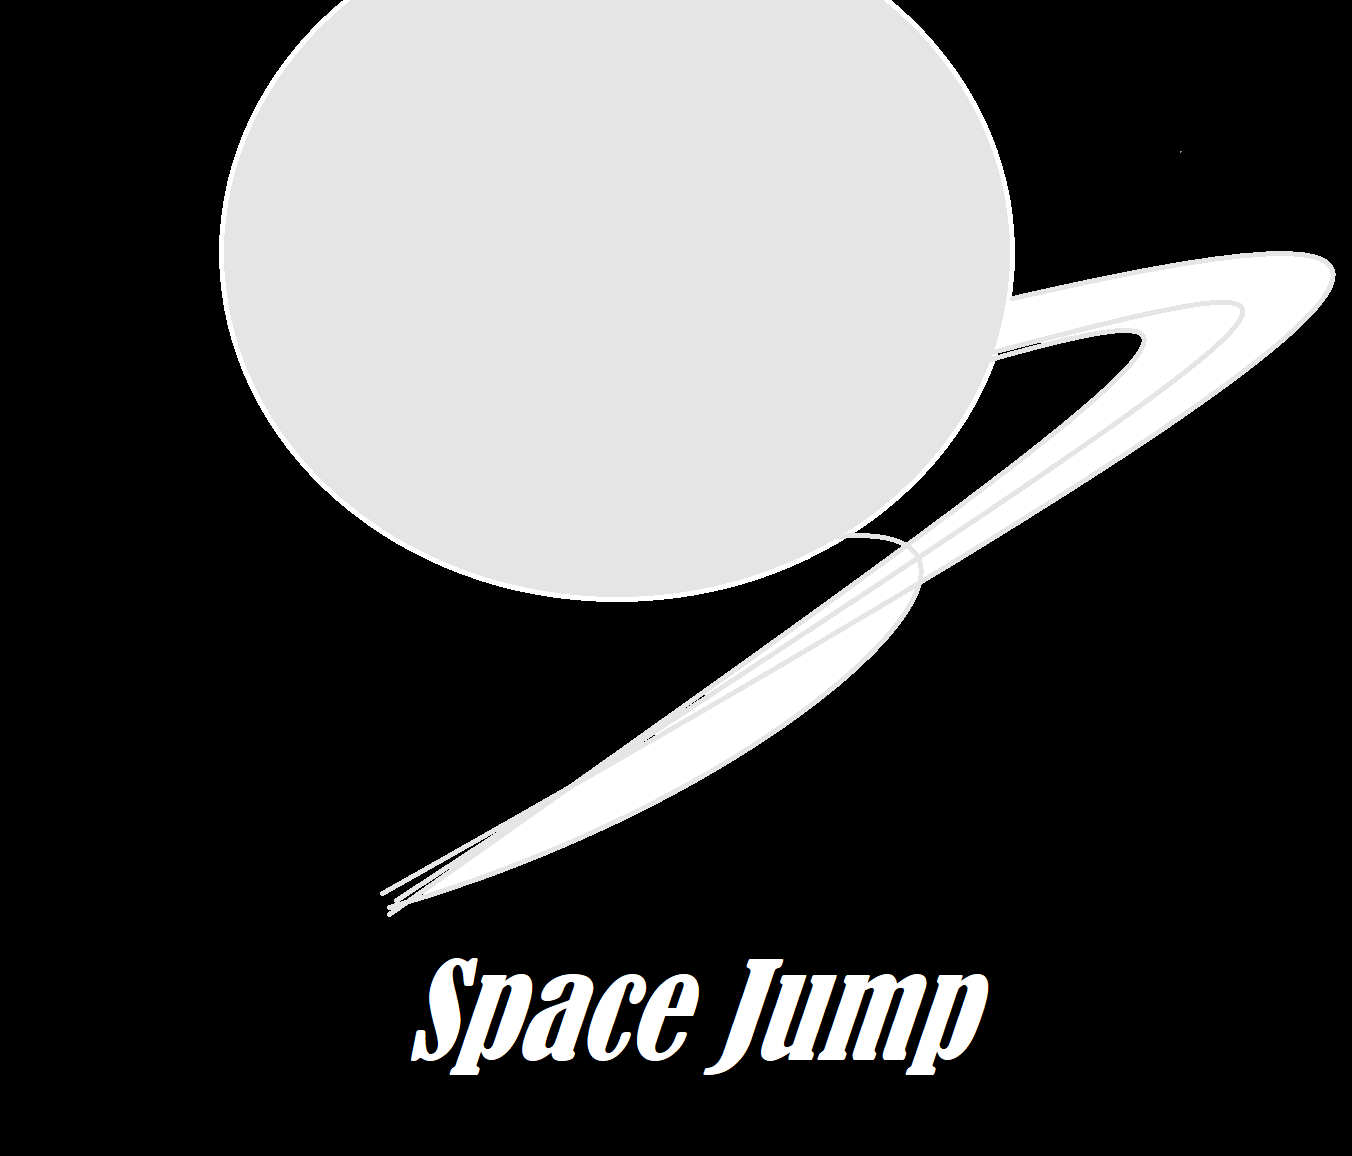 SpaceJump: The Prototype And Beyond